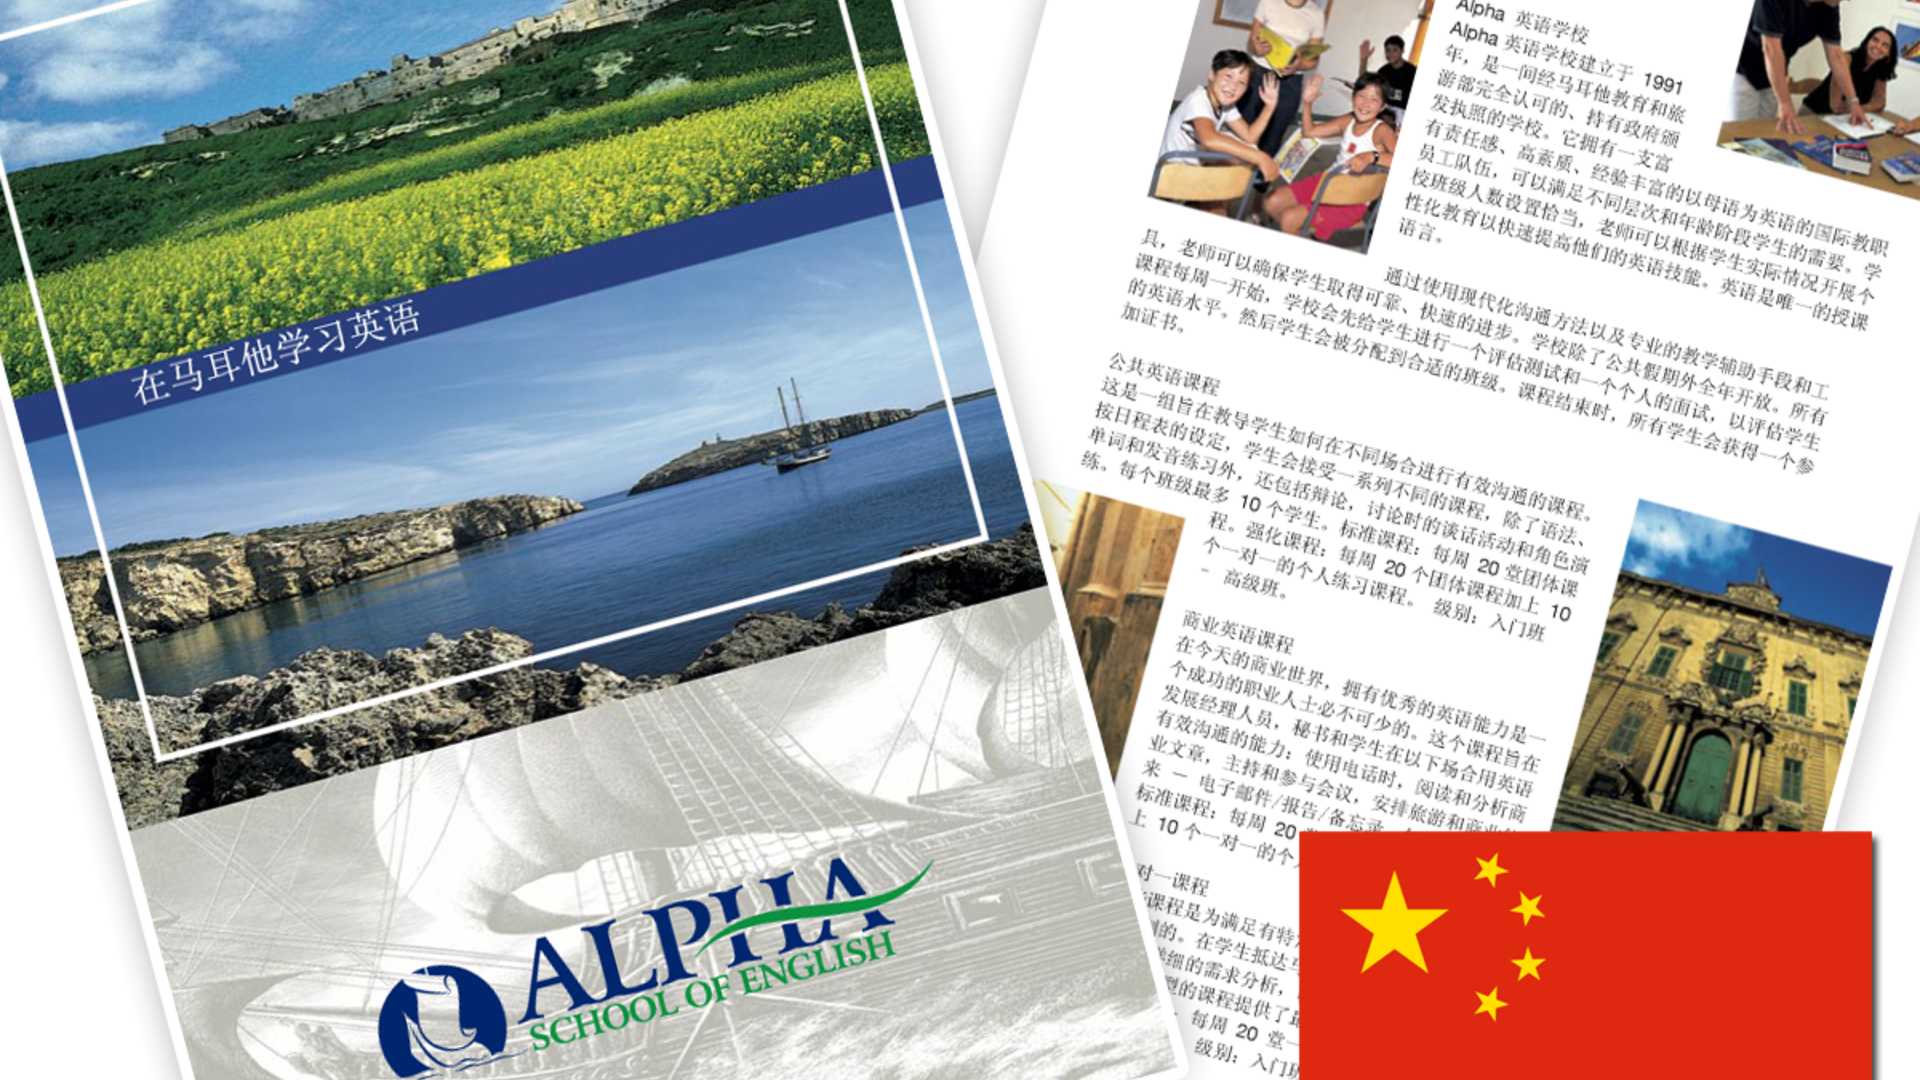 Alpha School of English - General Brochure in Chinese